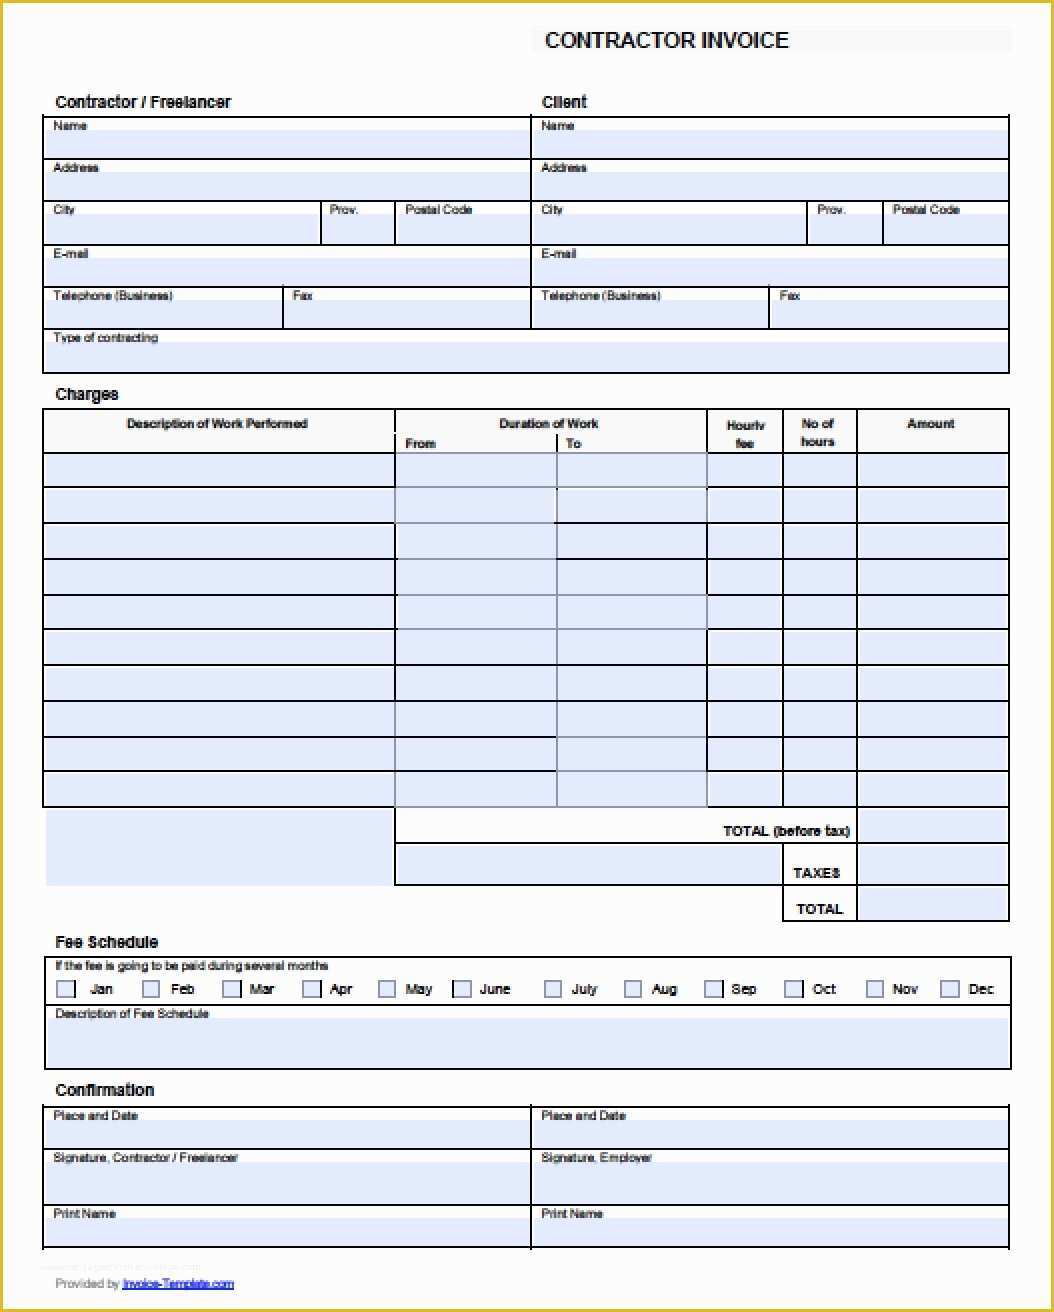 Construction Invoice Template Excel Free Of Free Contractor Invoice Template Excel Pdf